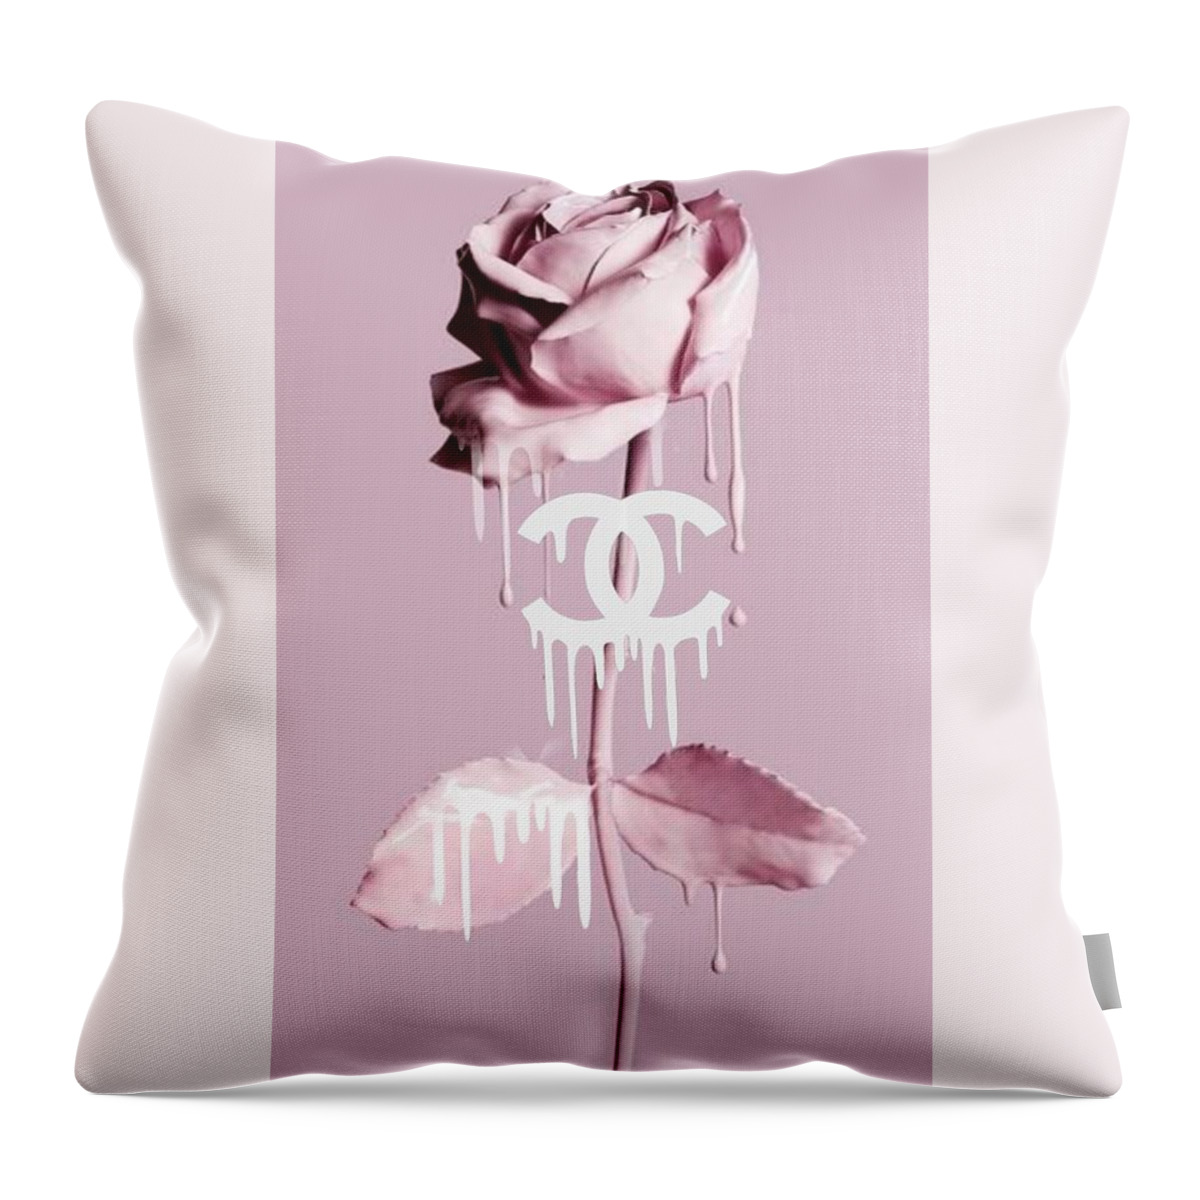 Dripping in Luxury Throw Pillow